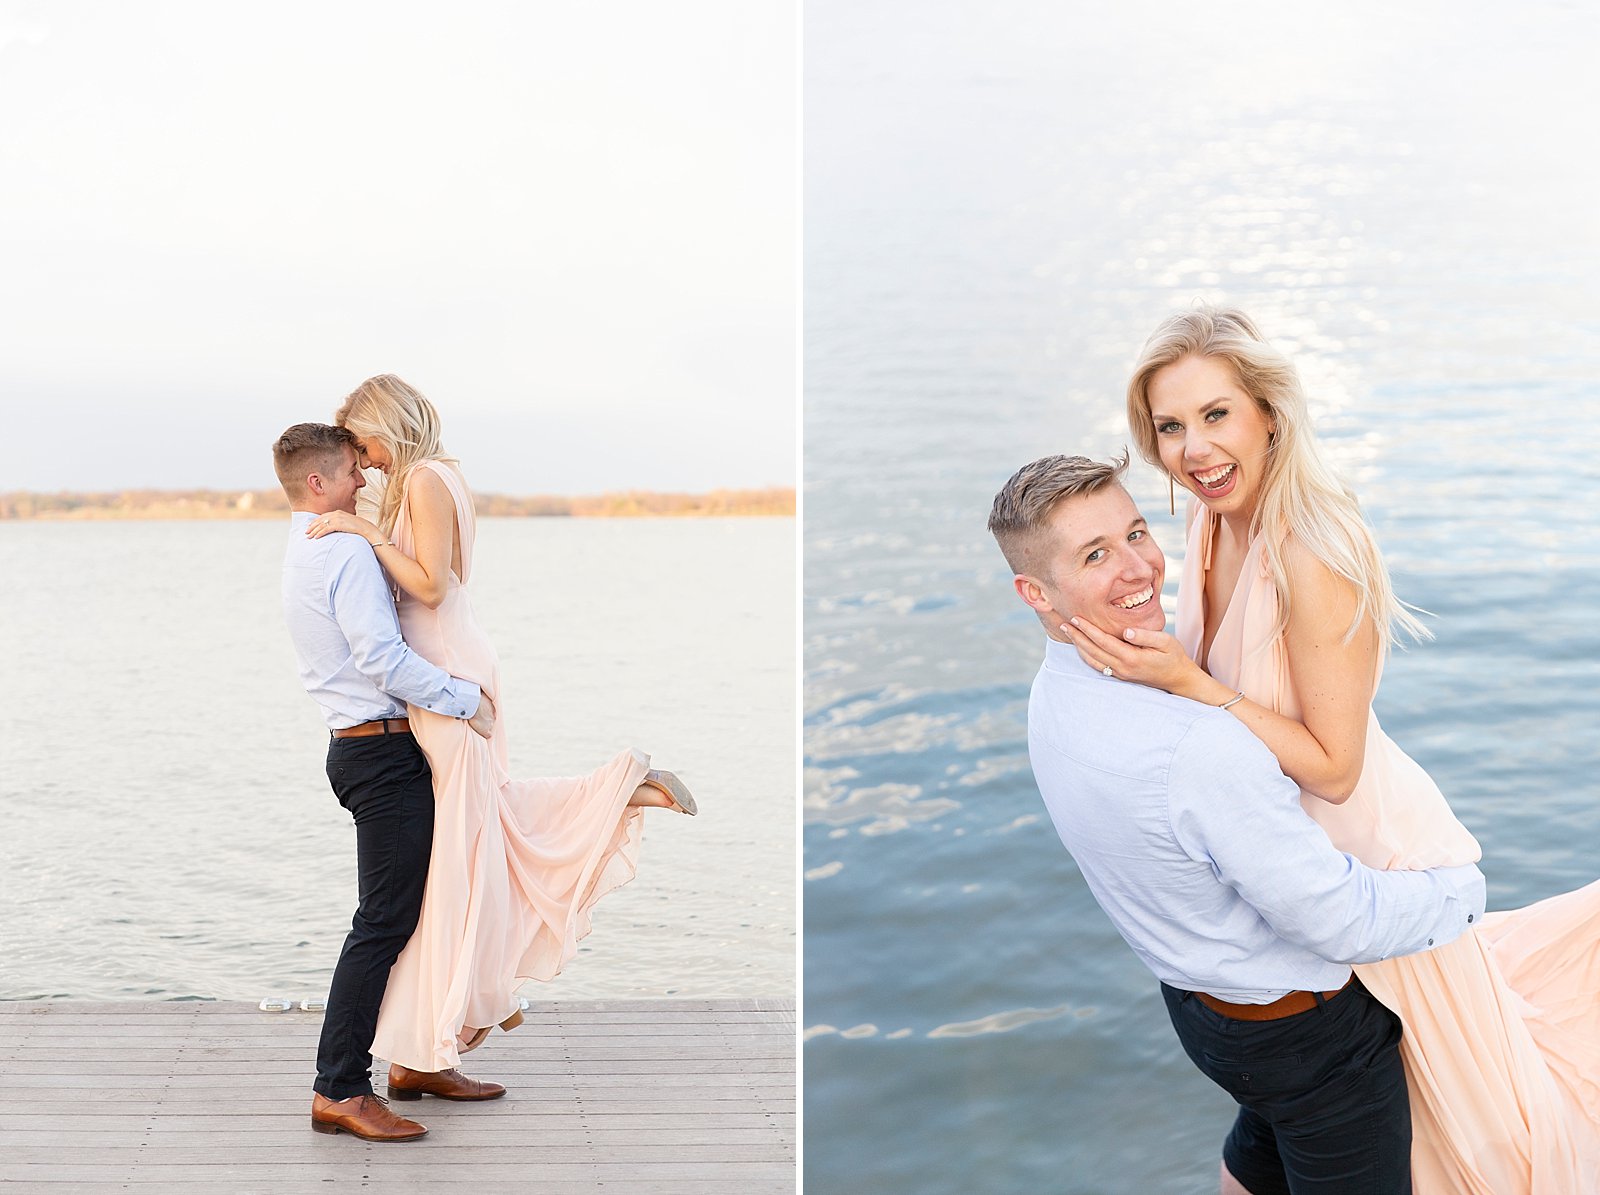 Randi Michelle Photography photographs Dallas engagement session styled by Kari Ellen Events